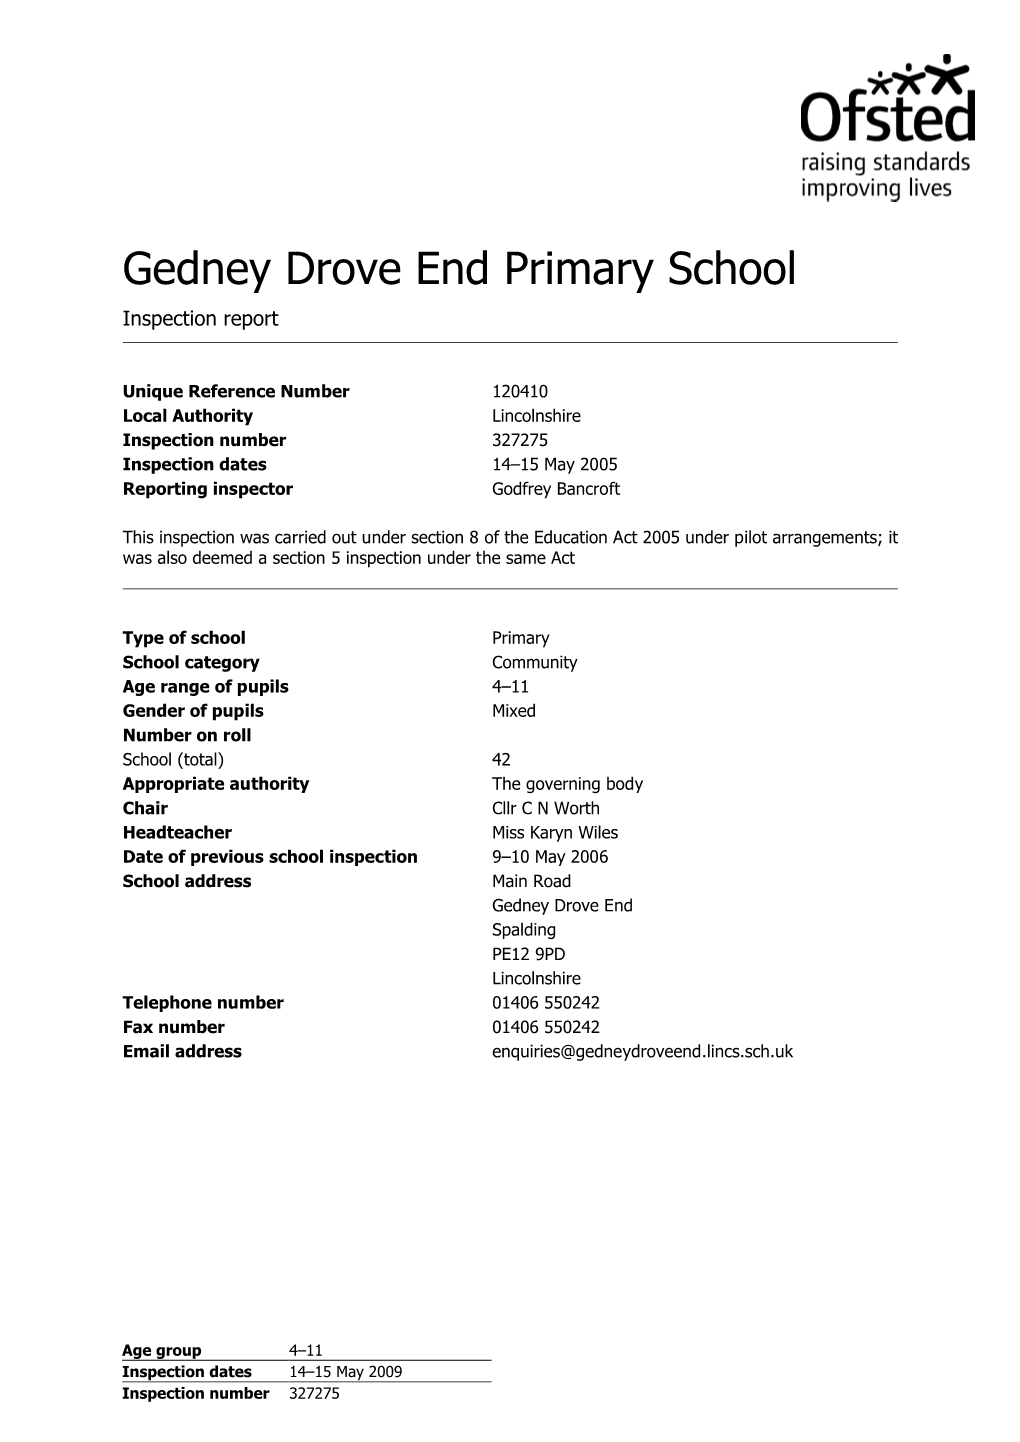 Gedney Drove End Primary School Inspection Report